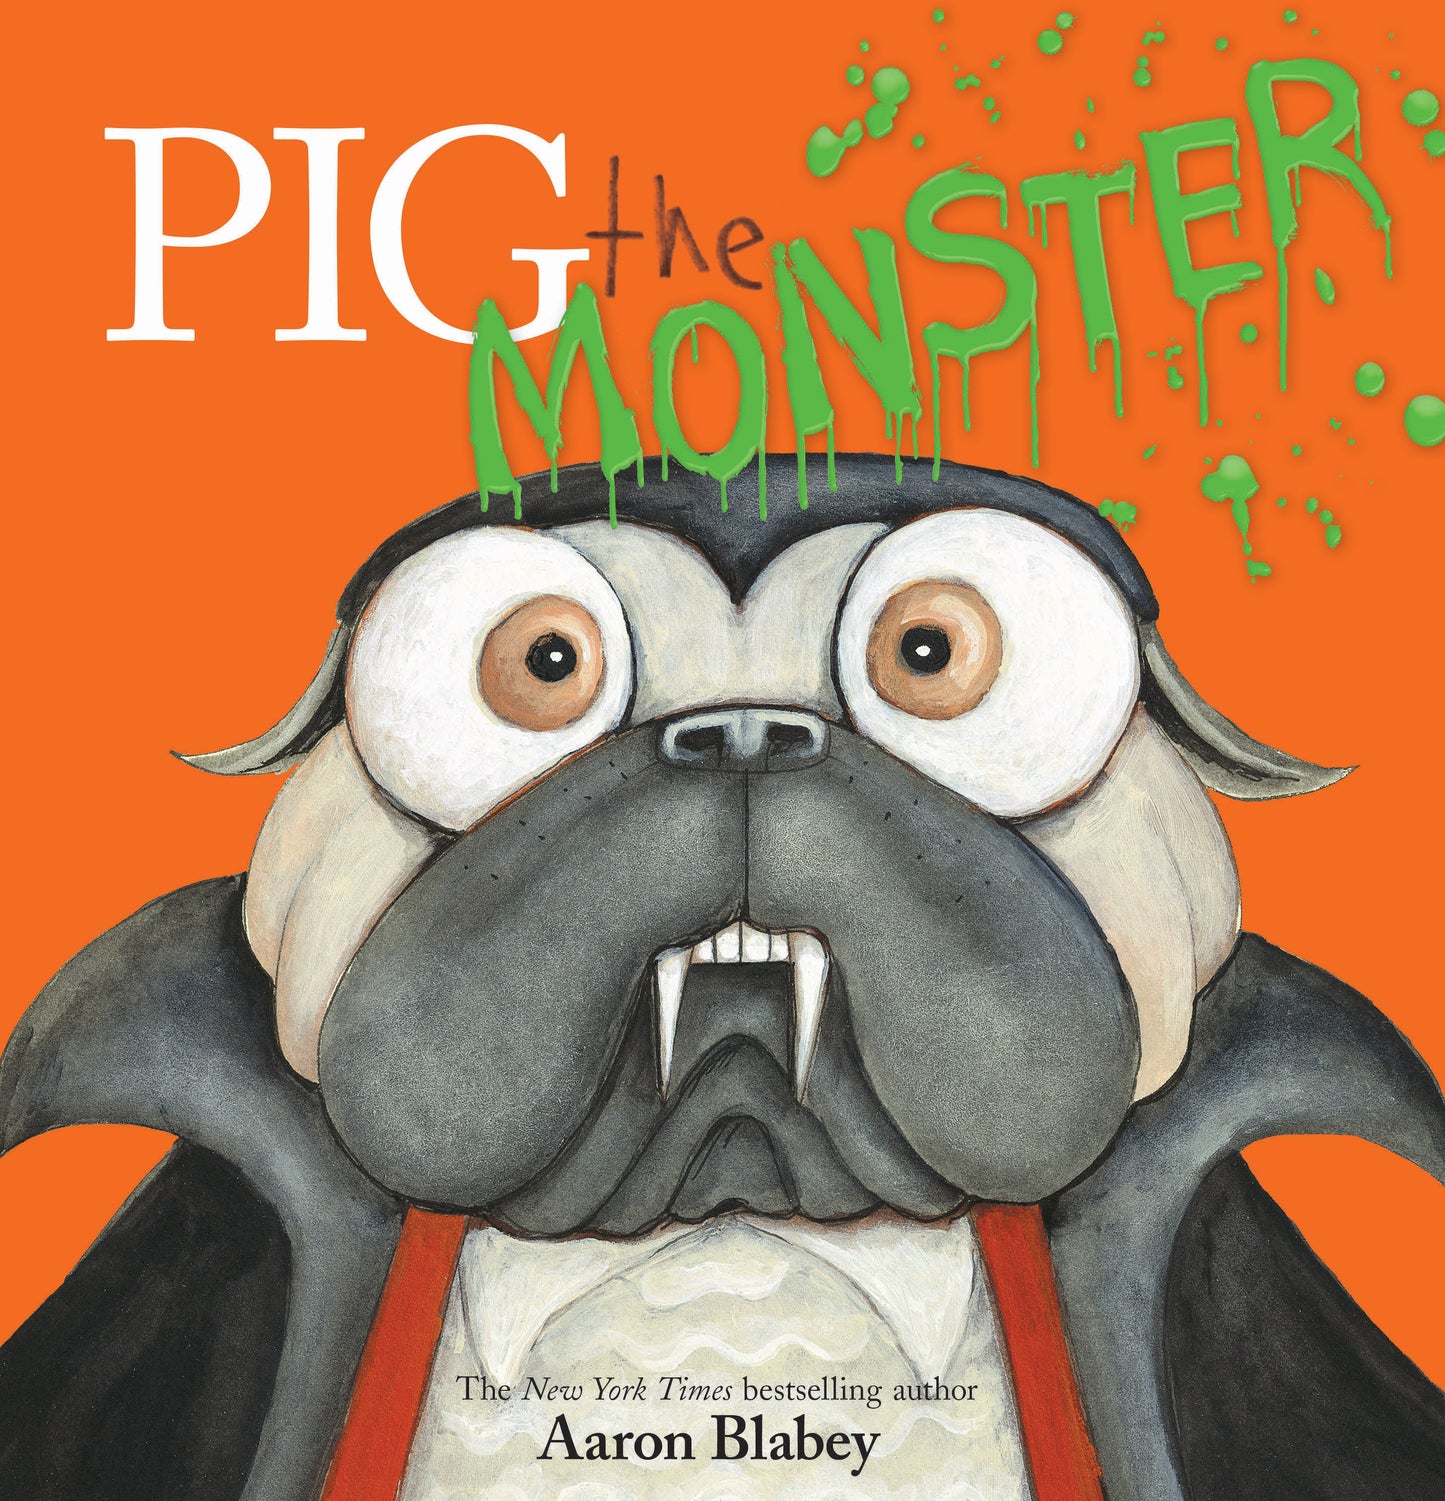 Pig the Pug #9 Pig the Monster  Aaron Blabey